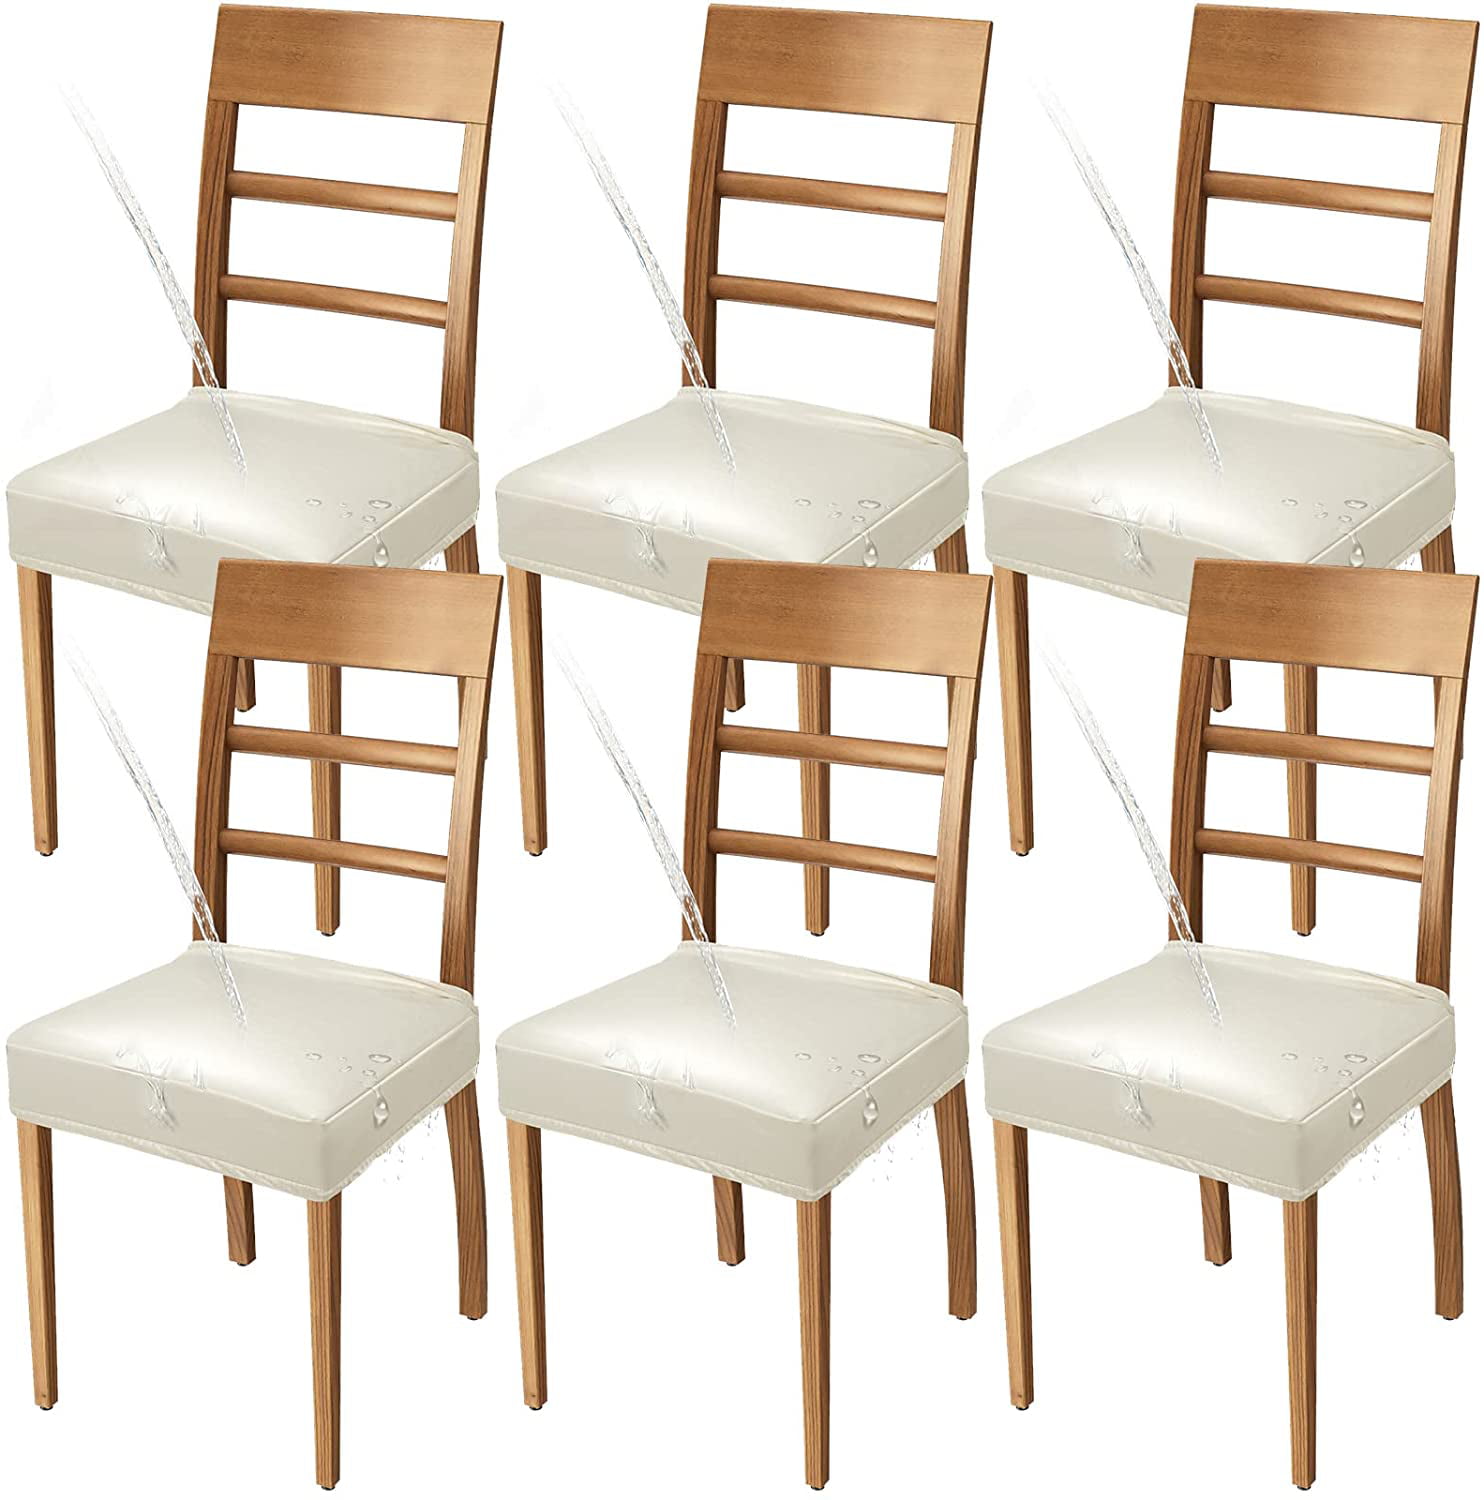 Details about   US Home Dining Chair Seat Cover Solid Stretch Chair Slipcover Protective Decors 